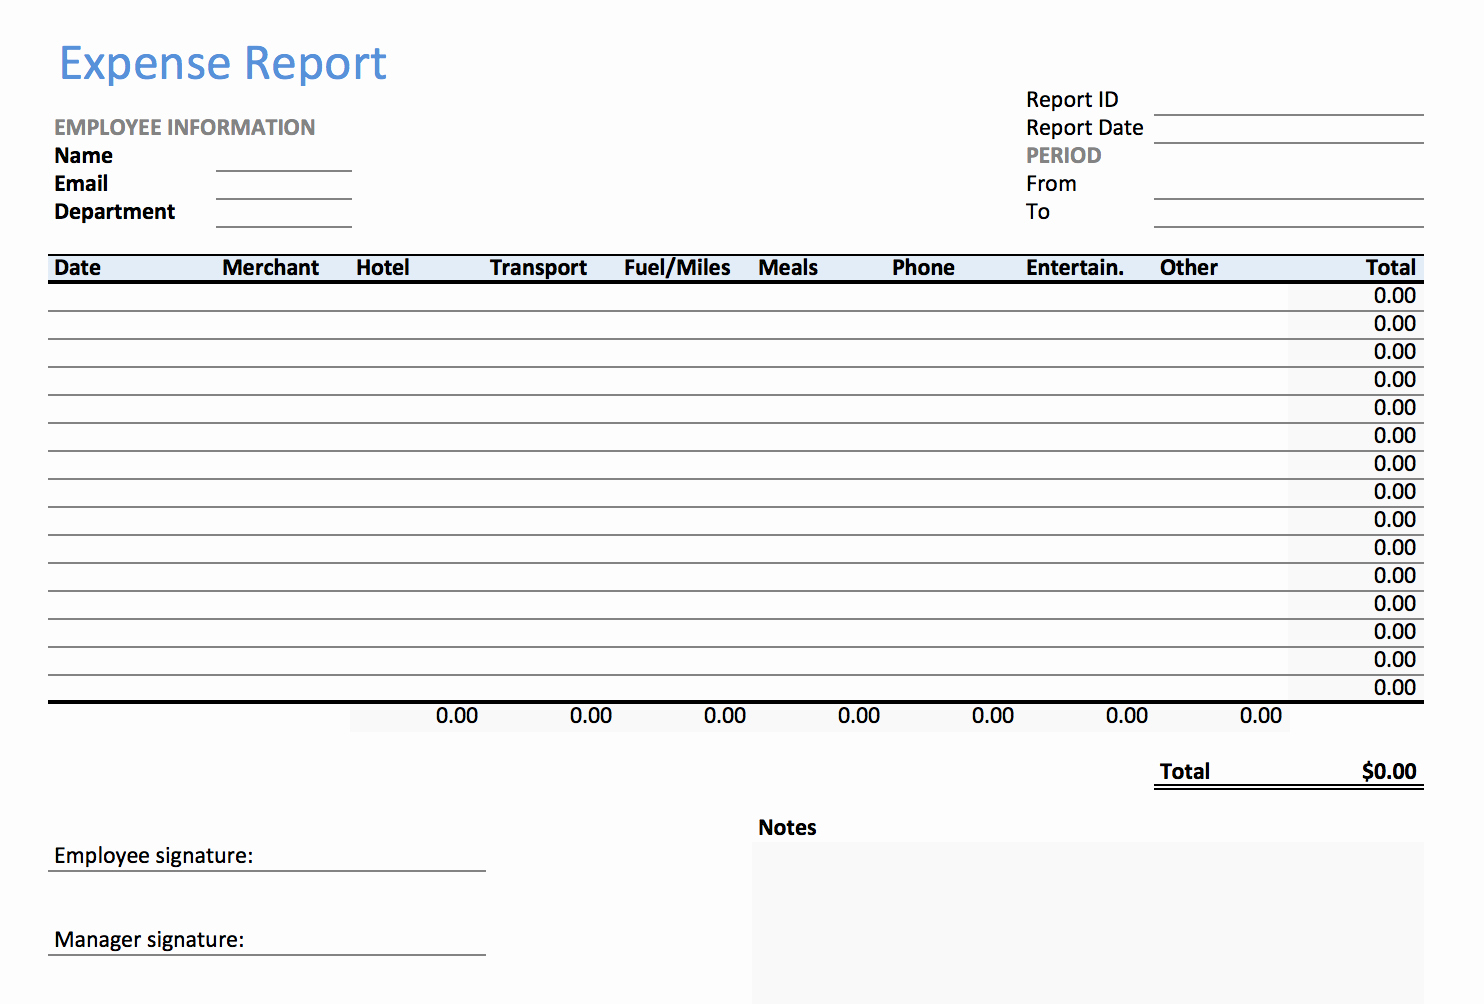 Excel Expense Report Template Best Of Excel Expense Report Template Keepek